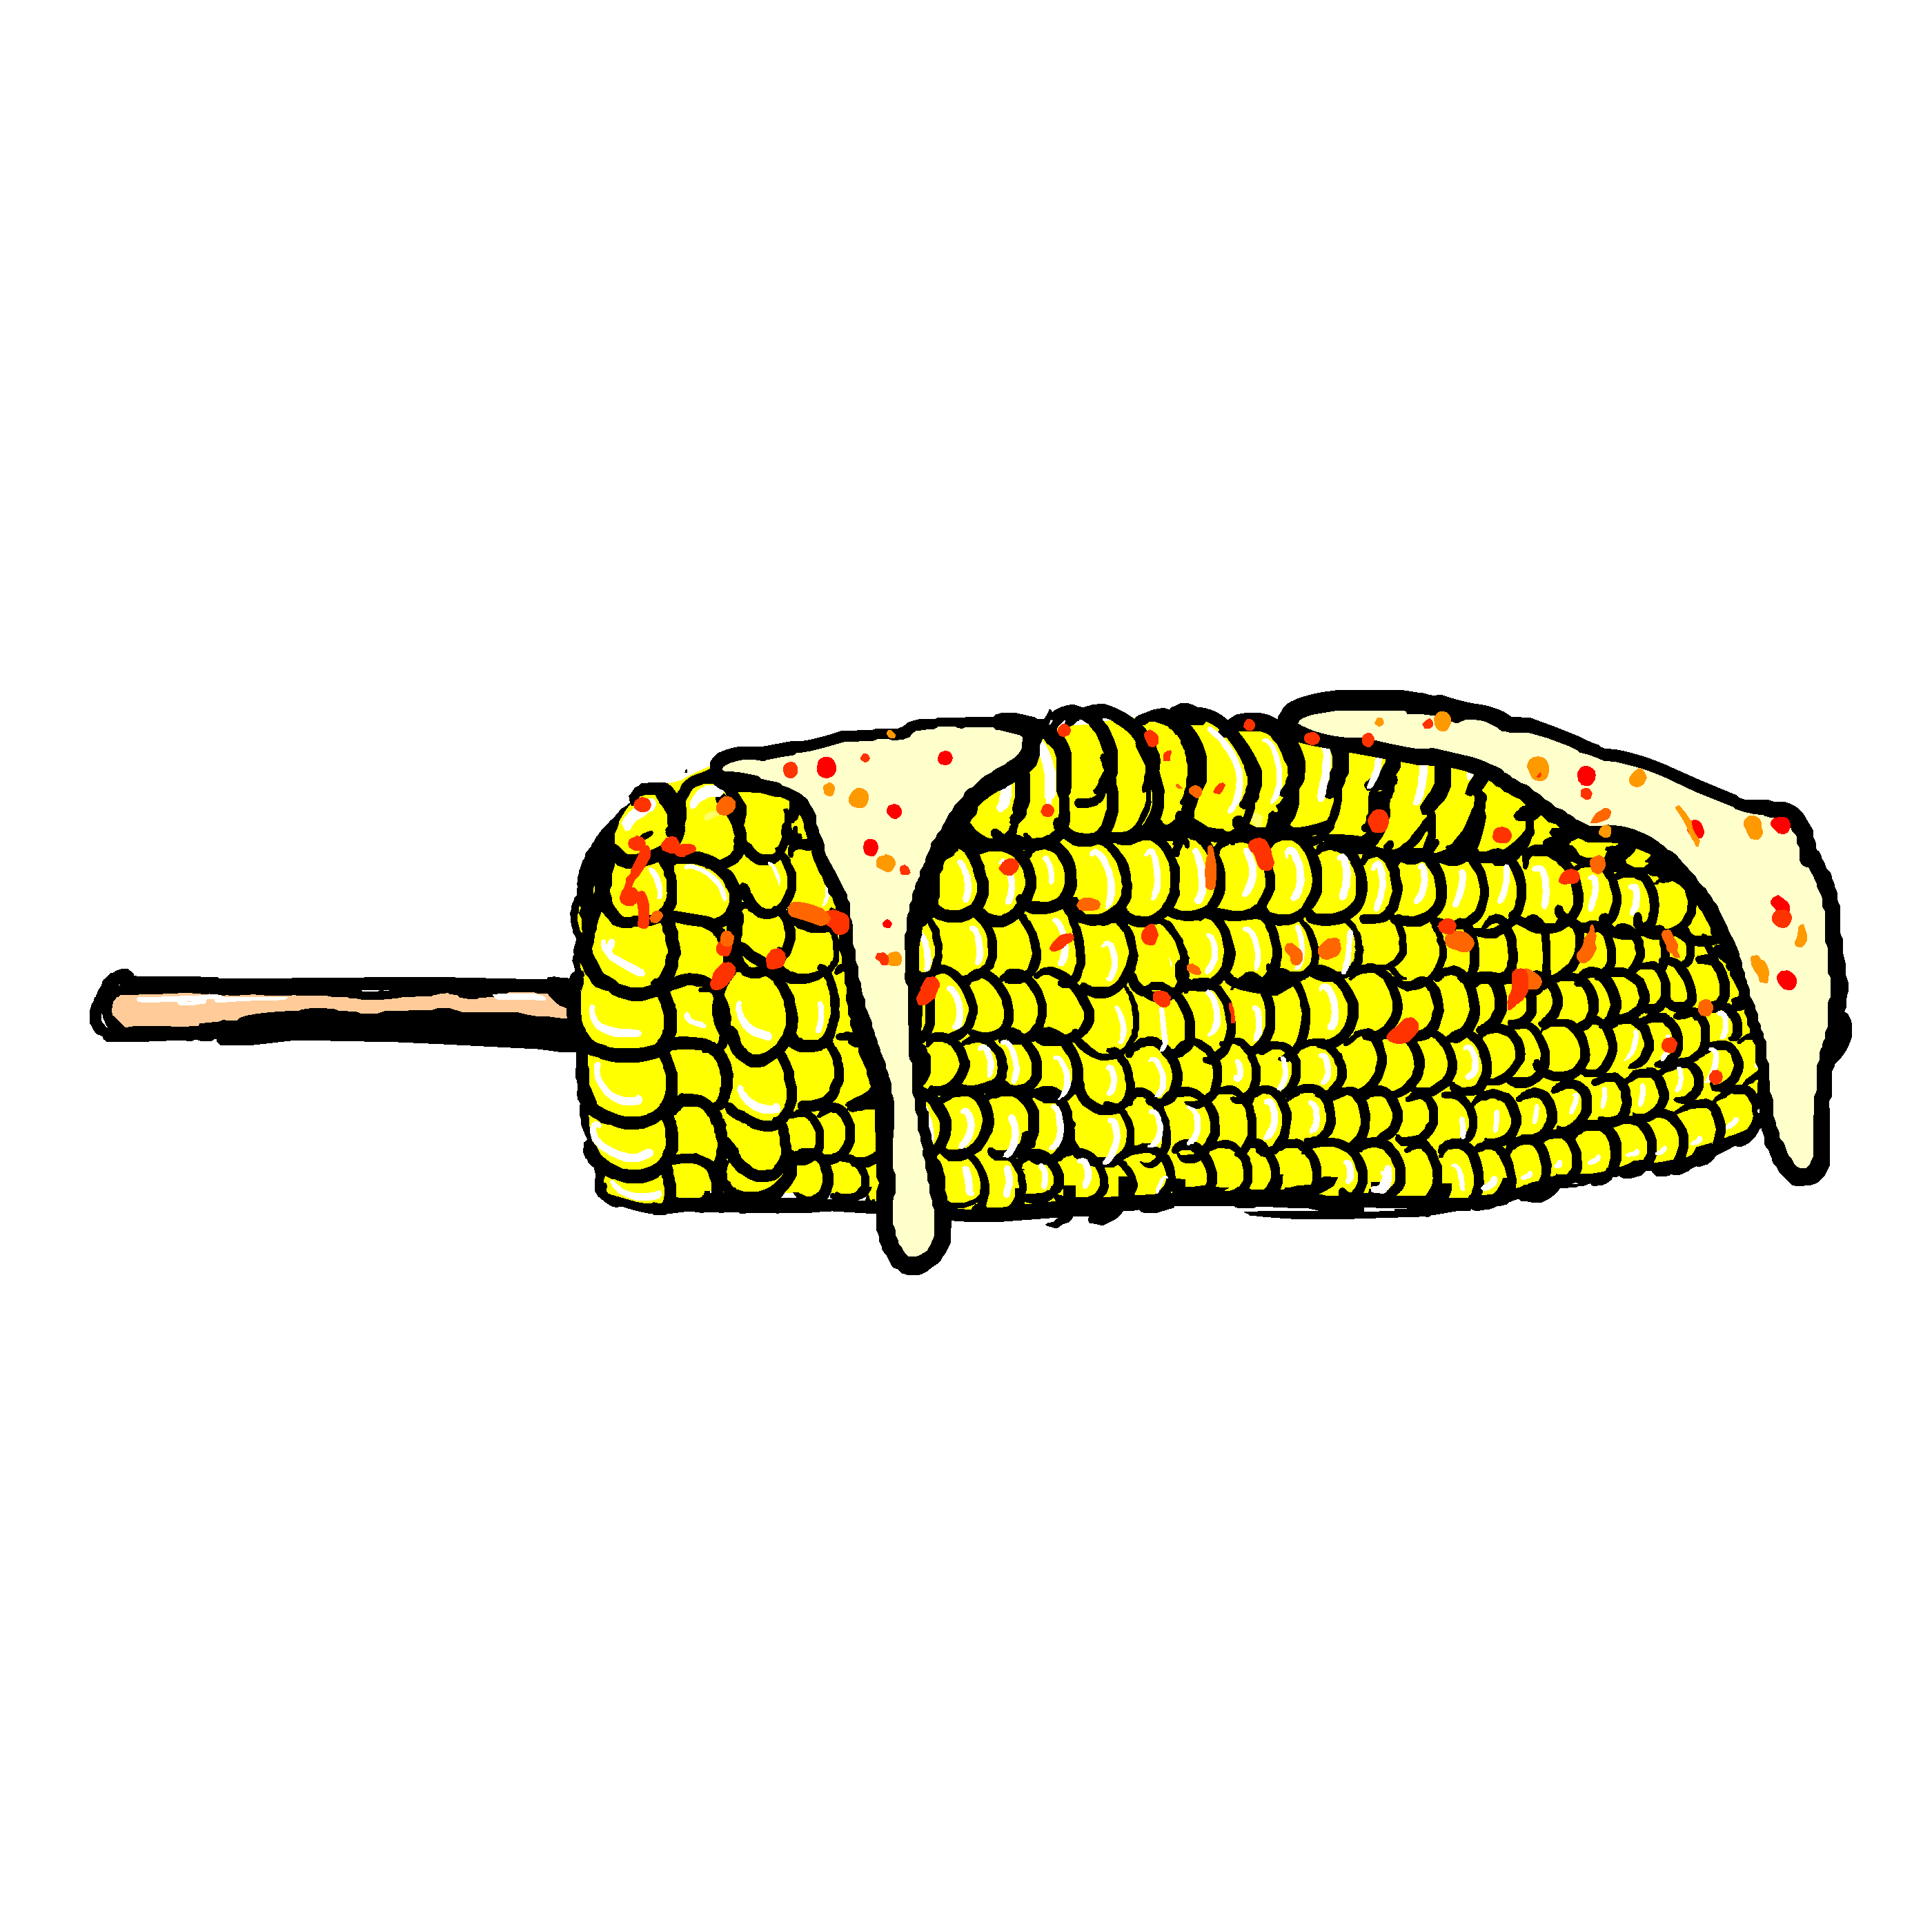 Corn Tropicalia Sticker by deladeso for iOS & Android | GIPHY